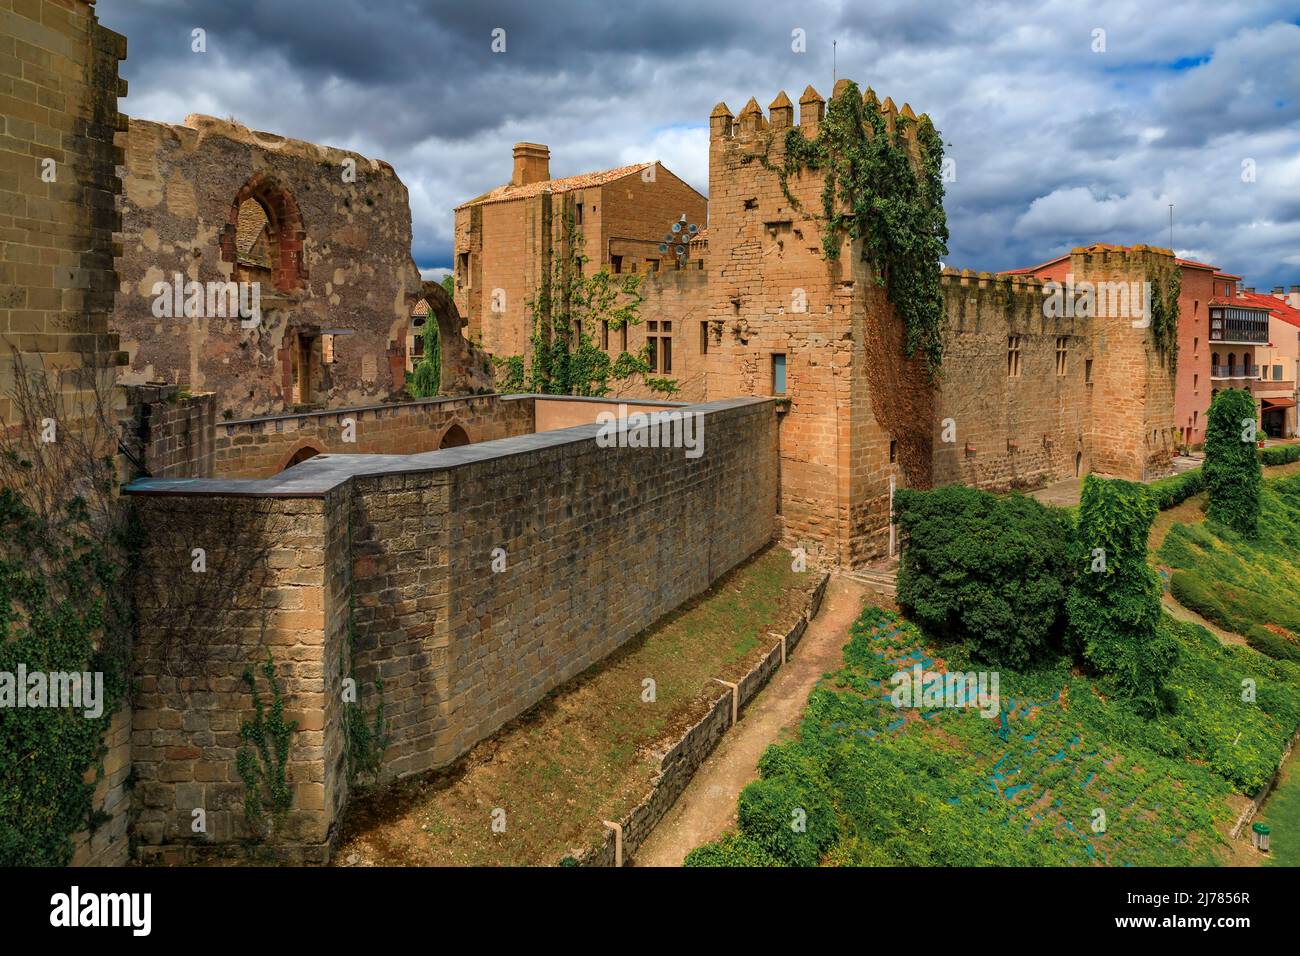 Olite, Spain - June 23, 2021: Details of the walls of the old palace of the Kings of Navarre or Royal Palace of Olite in Navarra Stock Photo